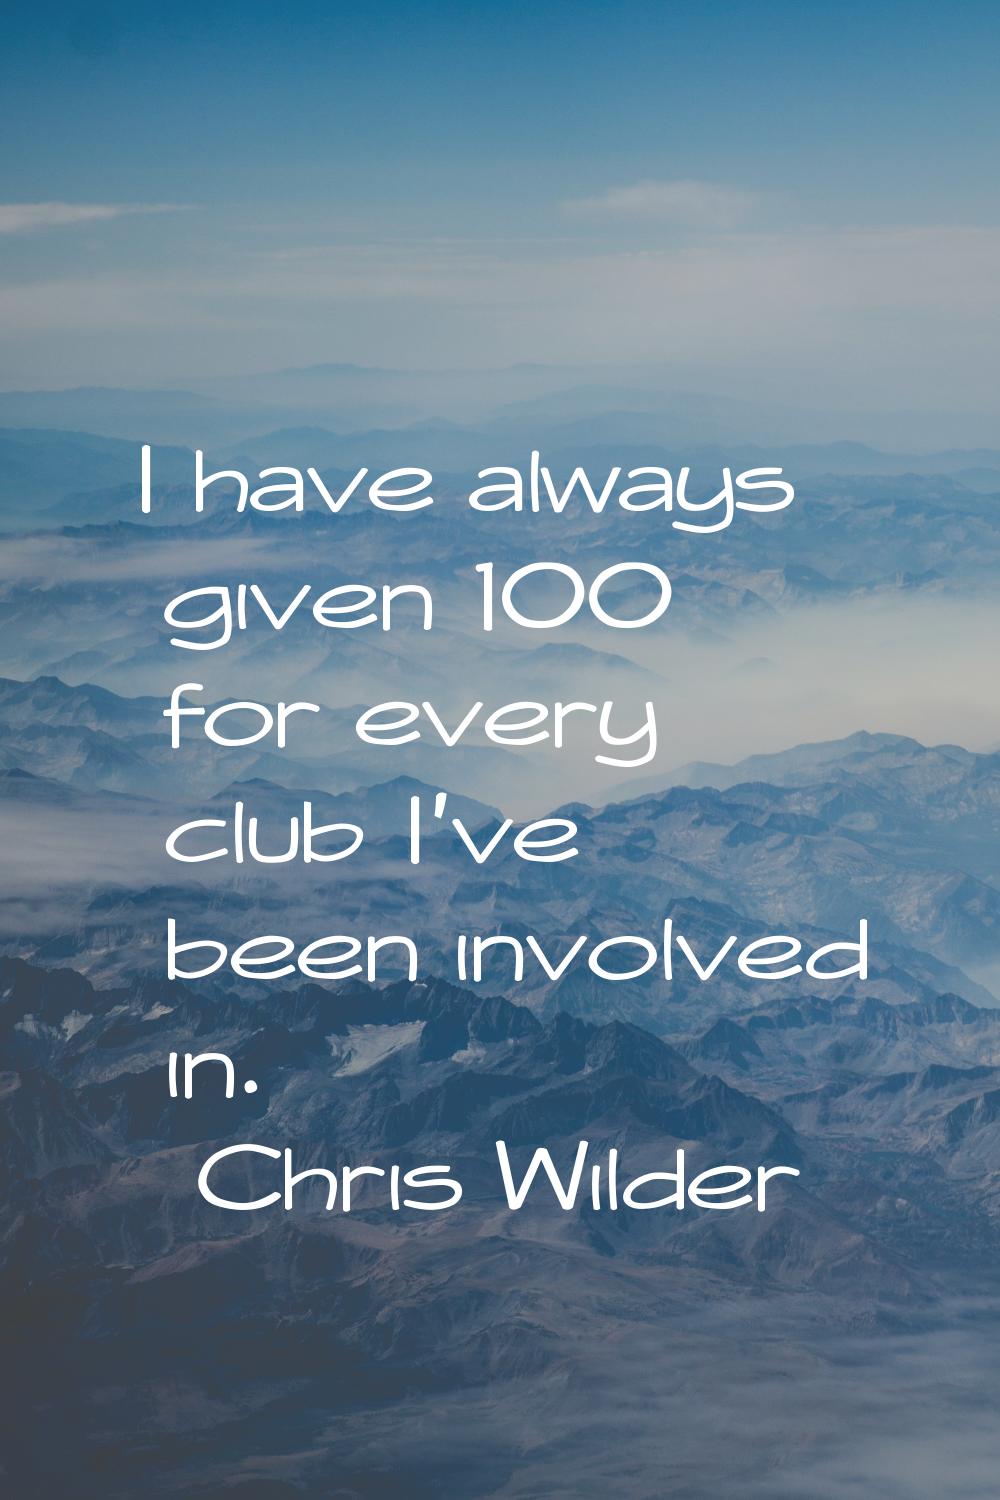 I have always given 100% for every club I've been involved in.